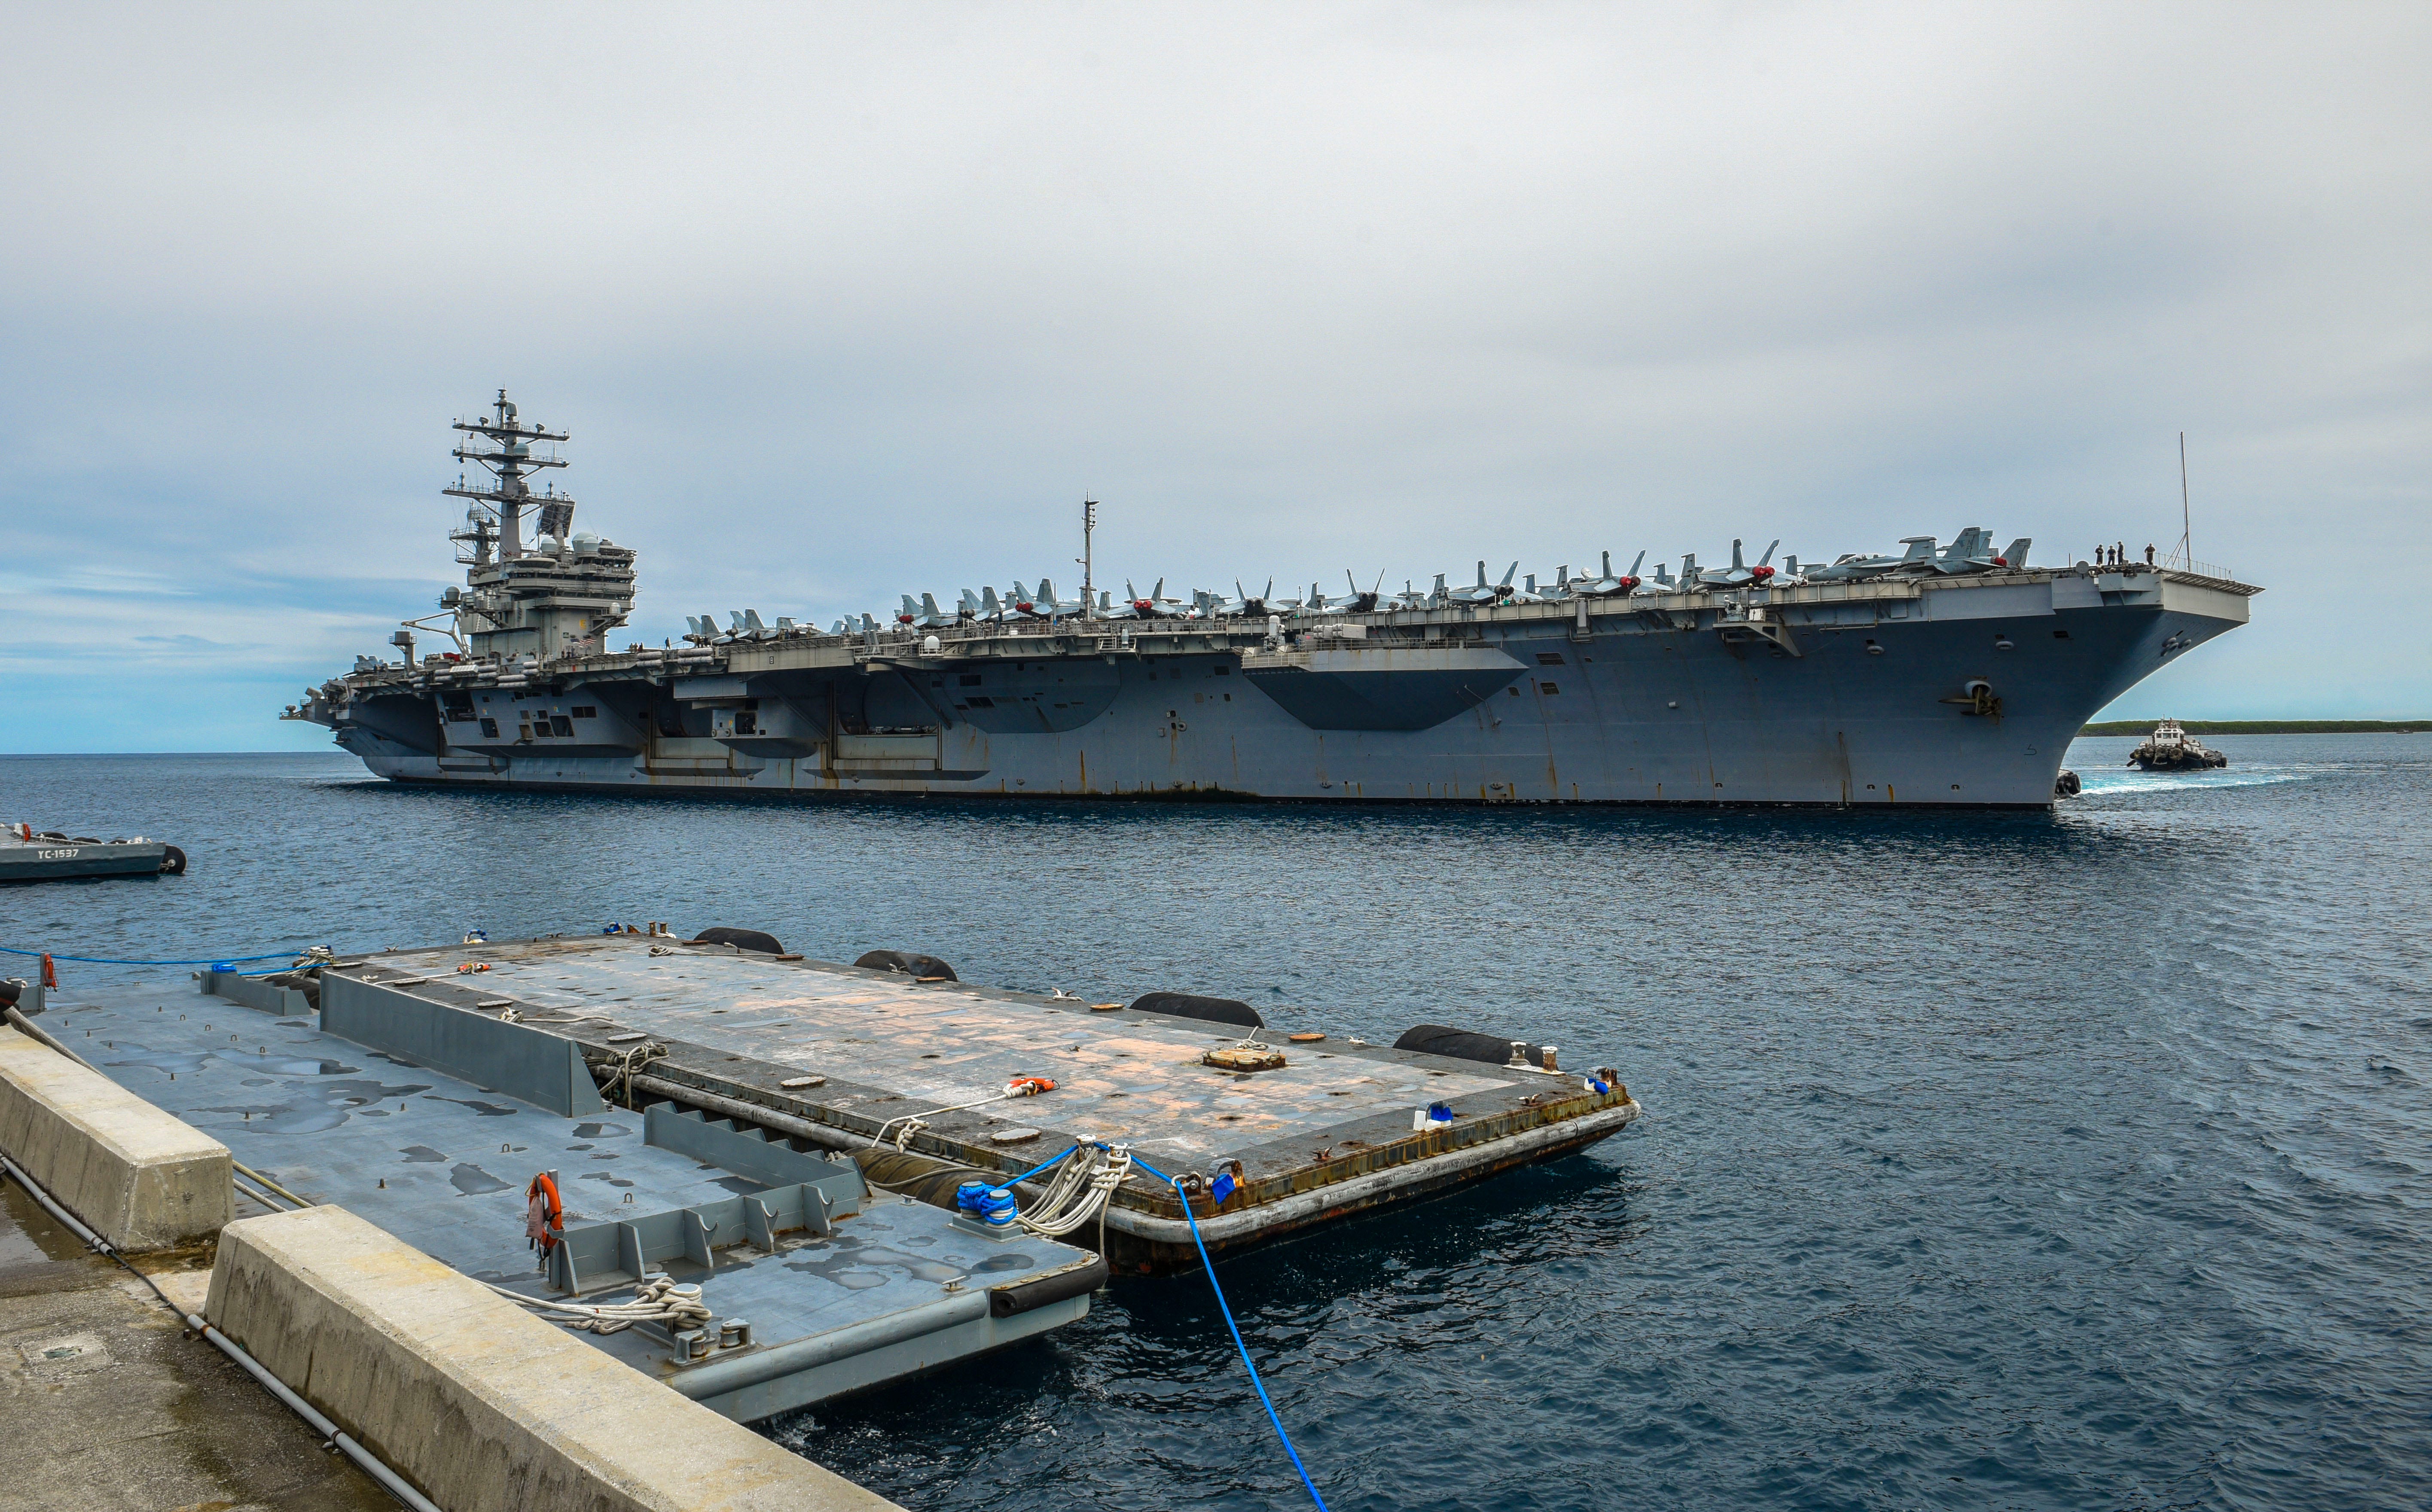 USS Ronald Reagan missing sailor confirmed dead, after search on Saturday, Local News